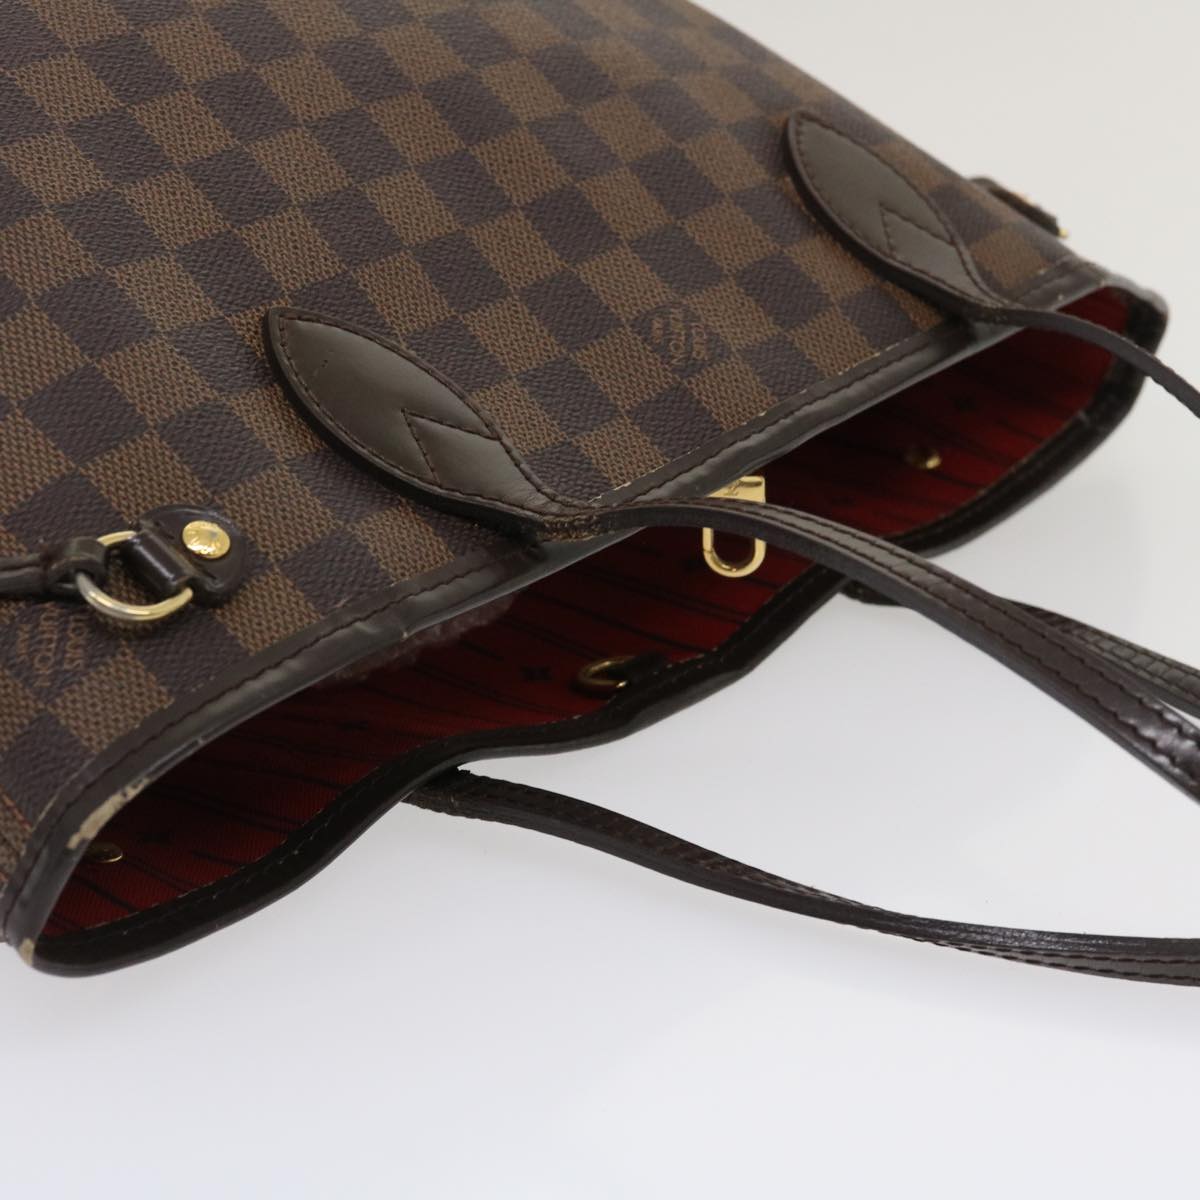 Authentic Louis Vuitton Neverfull PM for Sale in Riverview, FL